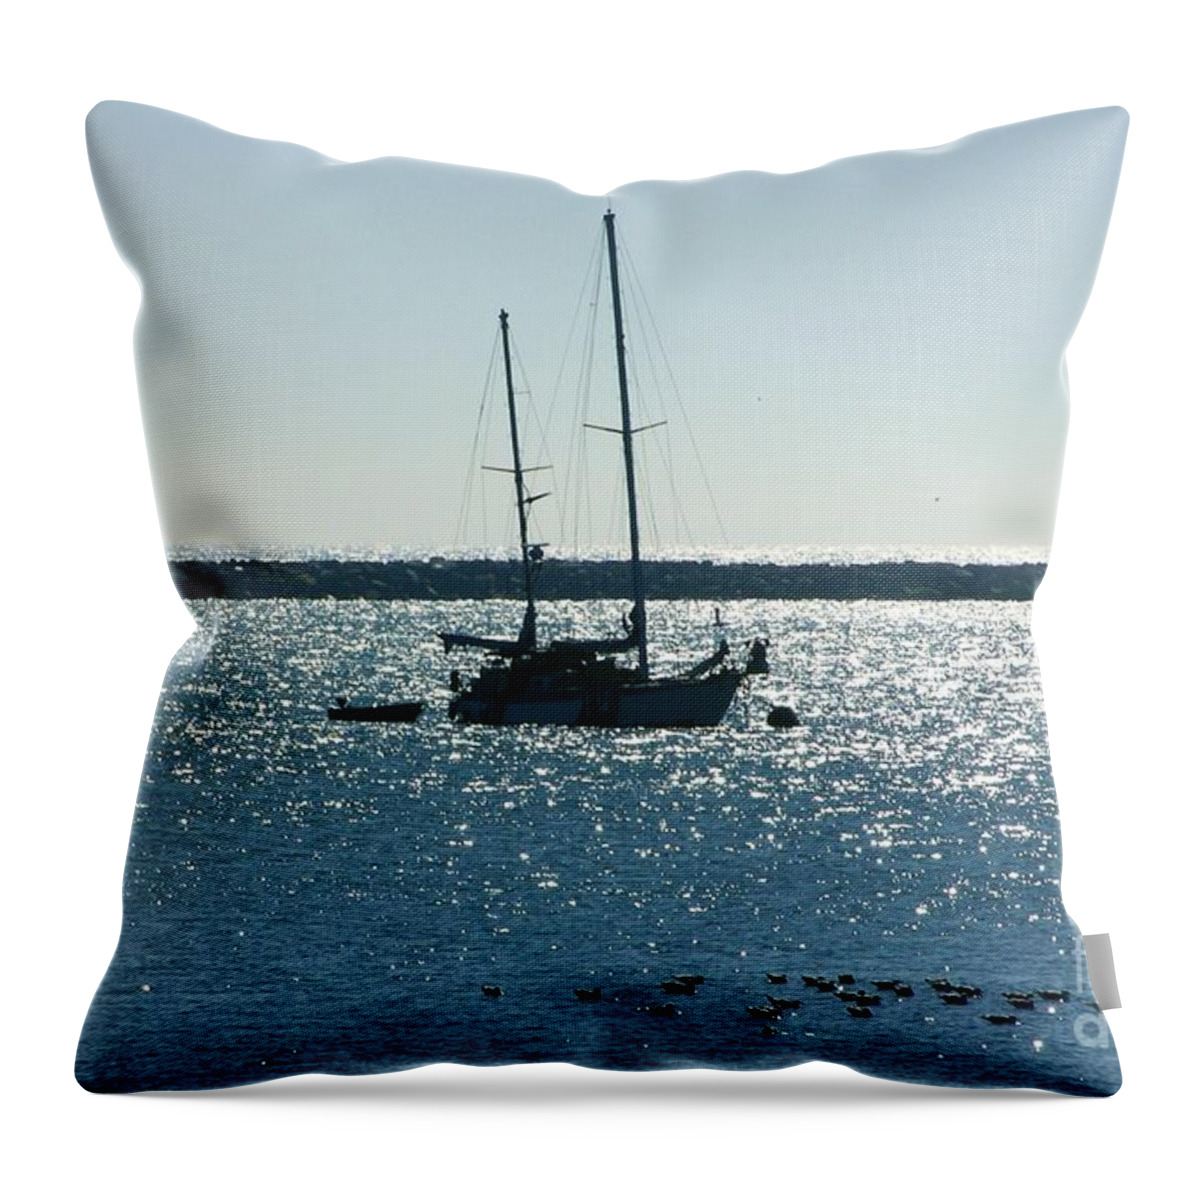 Seascape Throw Pillow featuring the photograph Tranquil Bay by Carol Groenen